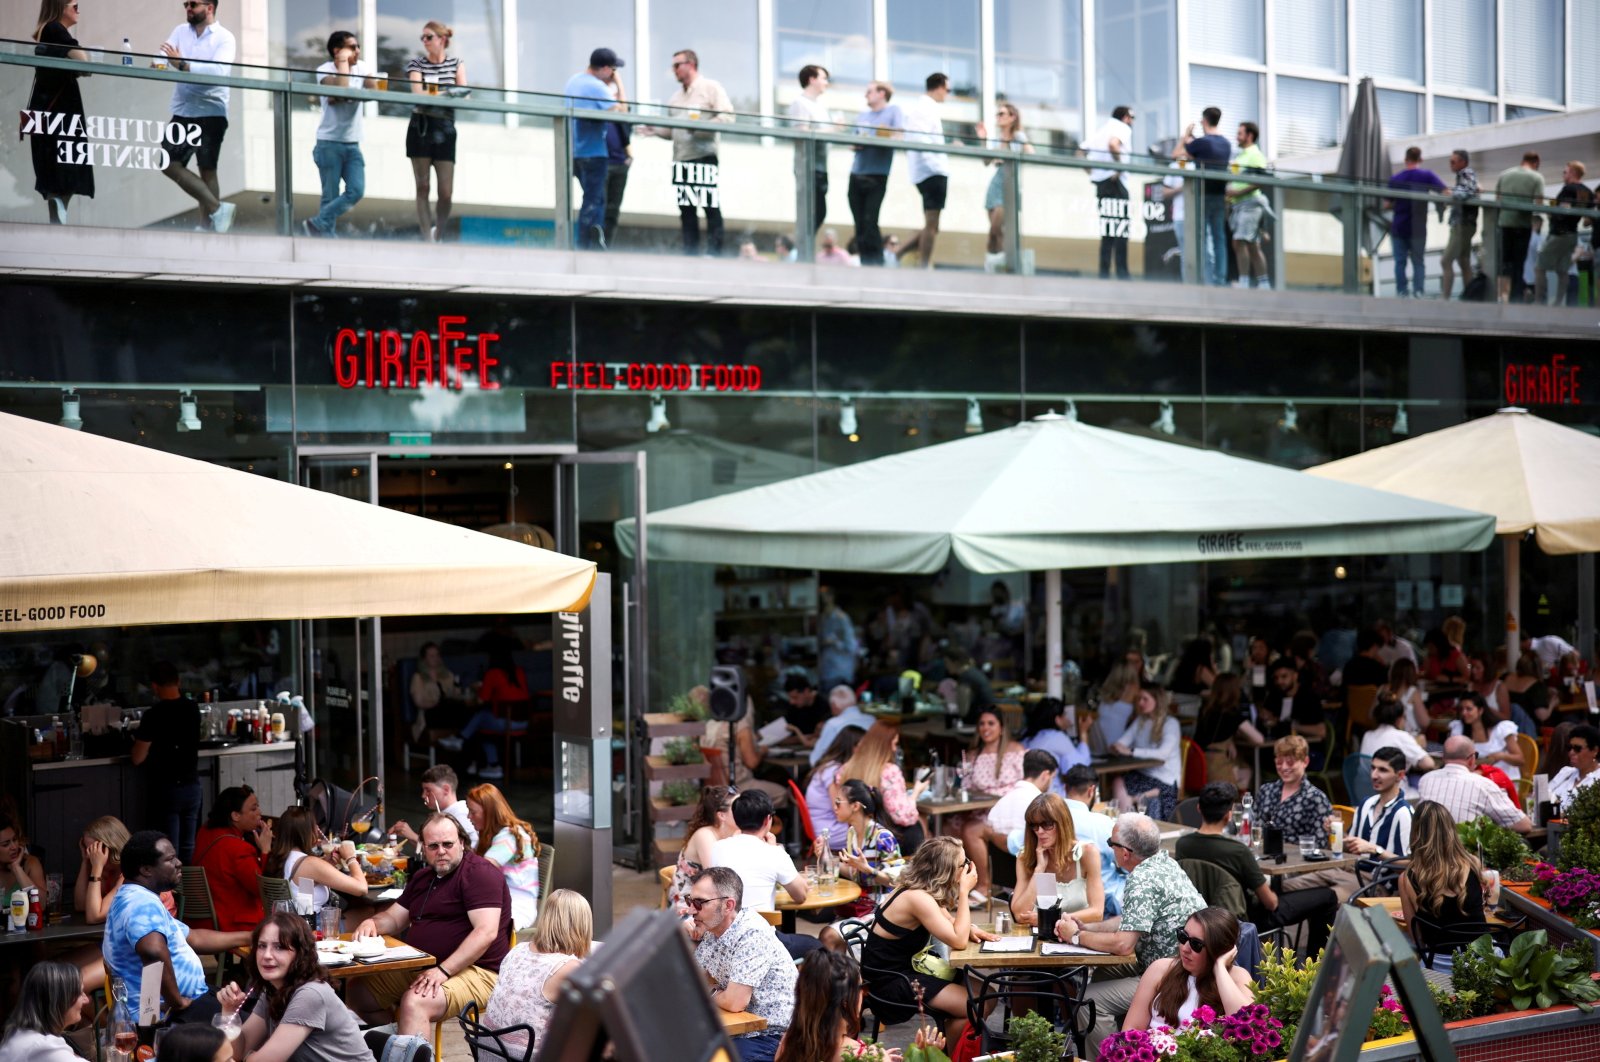 People sit at an outdoor restaurant on South Bank during sunny weather, amid the coronavirus outbreak, London, Britain, June 5, 2021. (Reuters Photo)